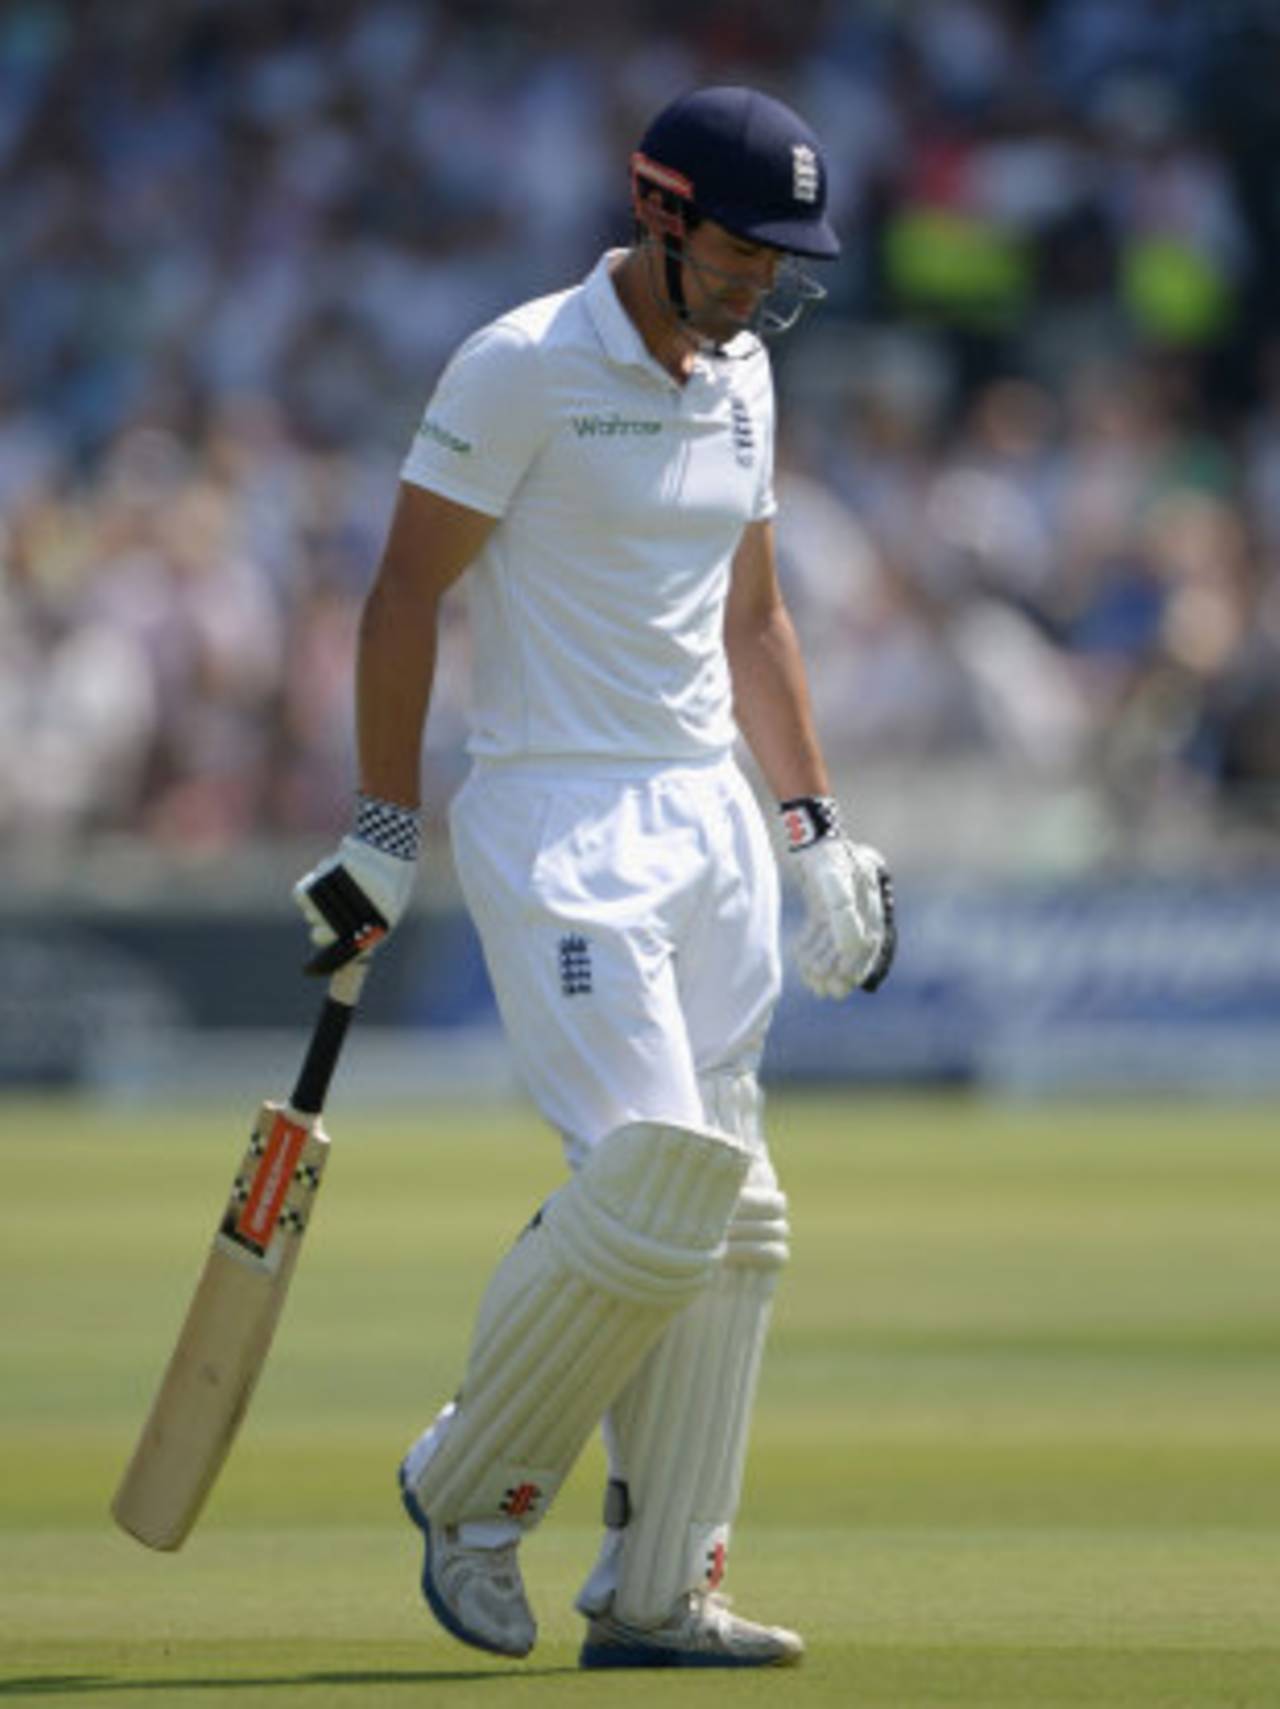 Cook's batting does not warrant selection but harping on about it gets us nowhere&nbsp;&nbsp;&bull;&nbsp;&nbsp;Getty Images